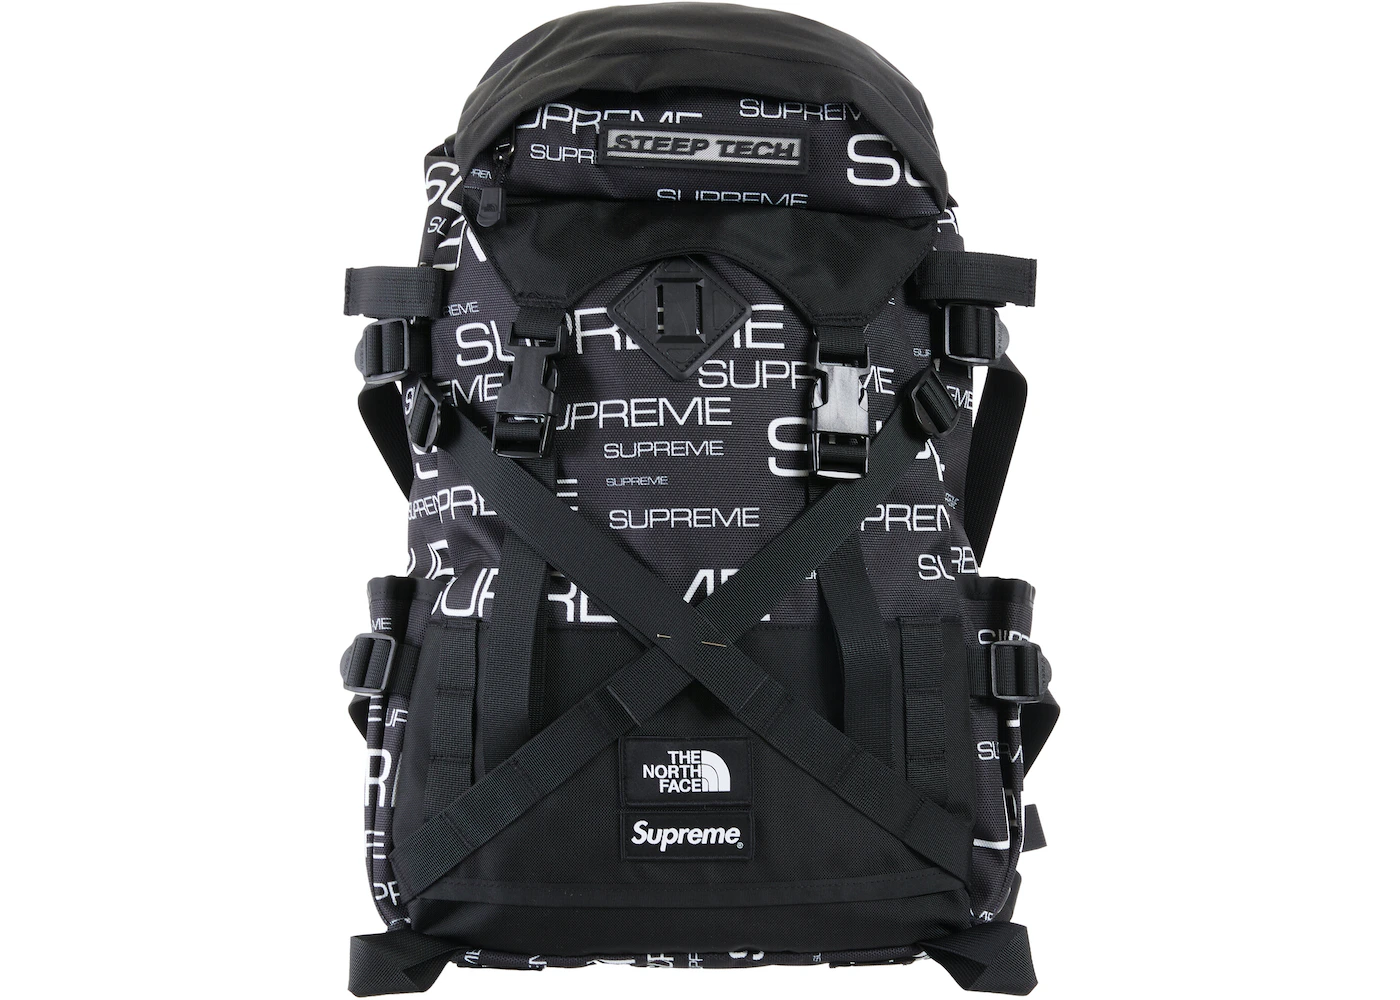 Centimeter Th Supersonische snelheid Supreme The North Face Steep Tech Backpack (FW21) Black - FW21 - US